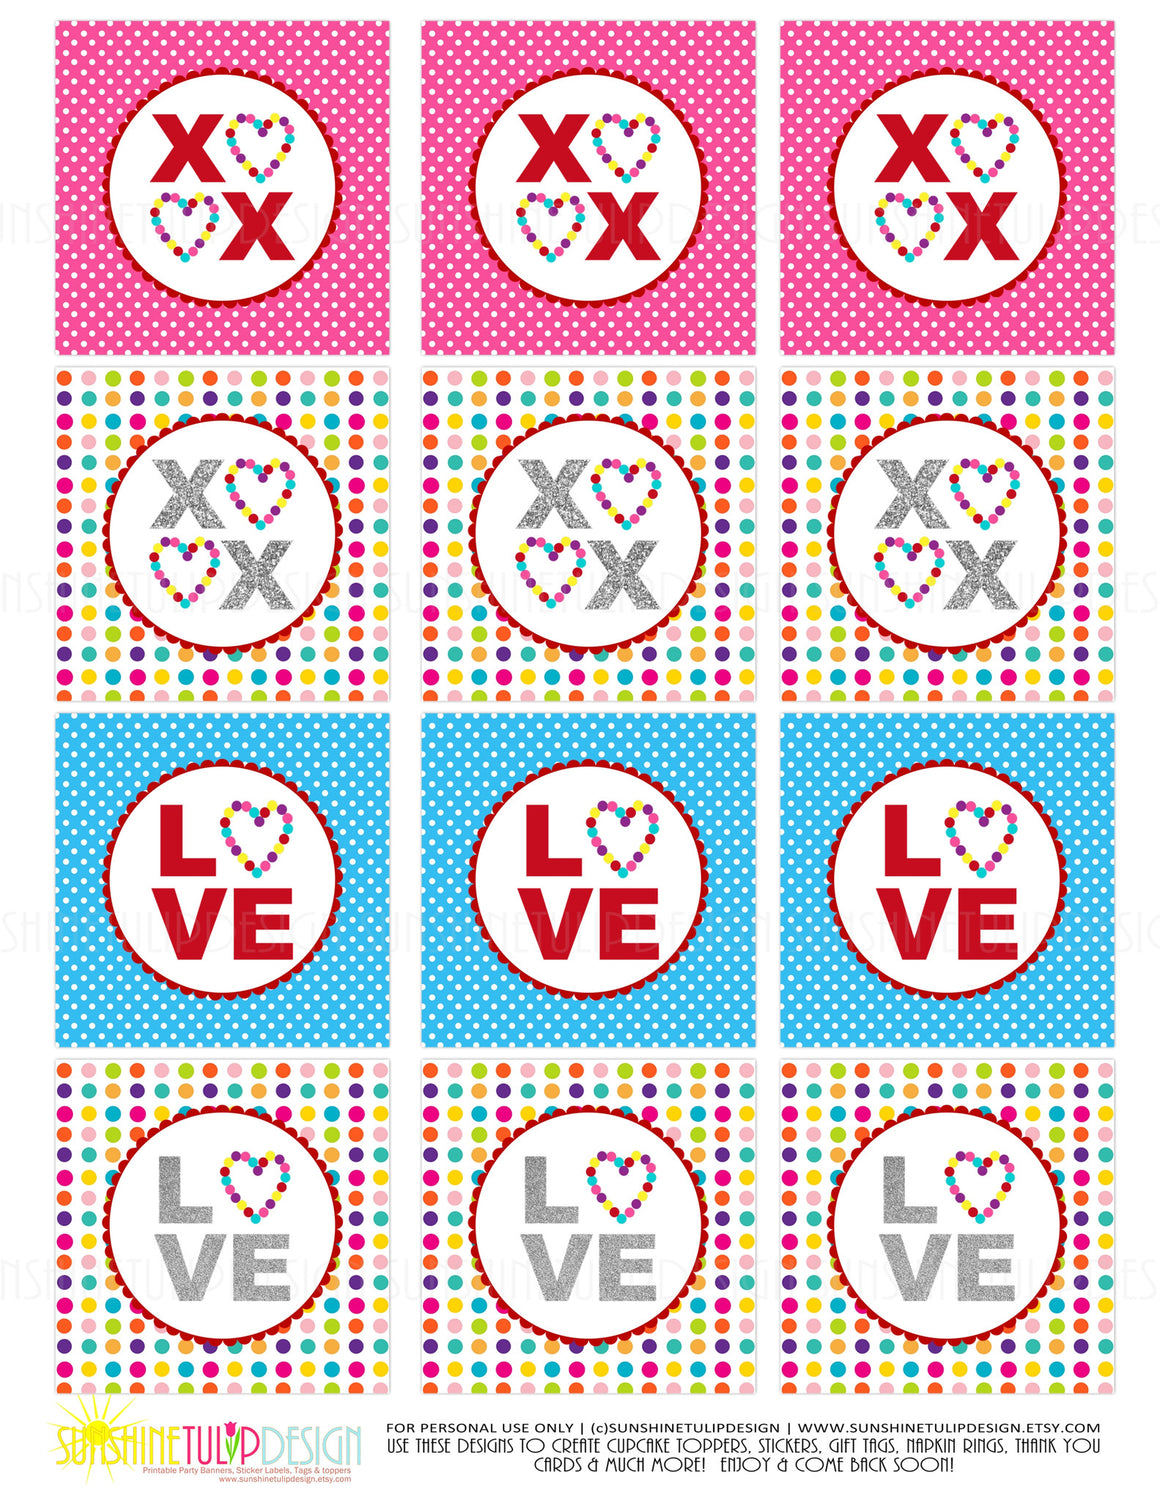 Printable Valentines Day XOXO Gift Tags & Cupcake Toppers, Printable LOVE Gift Tags & Cupcake Toppers by SUNSHINETULIPDESIGN - Sunshinetulipdesign